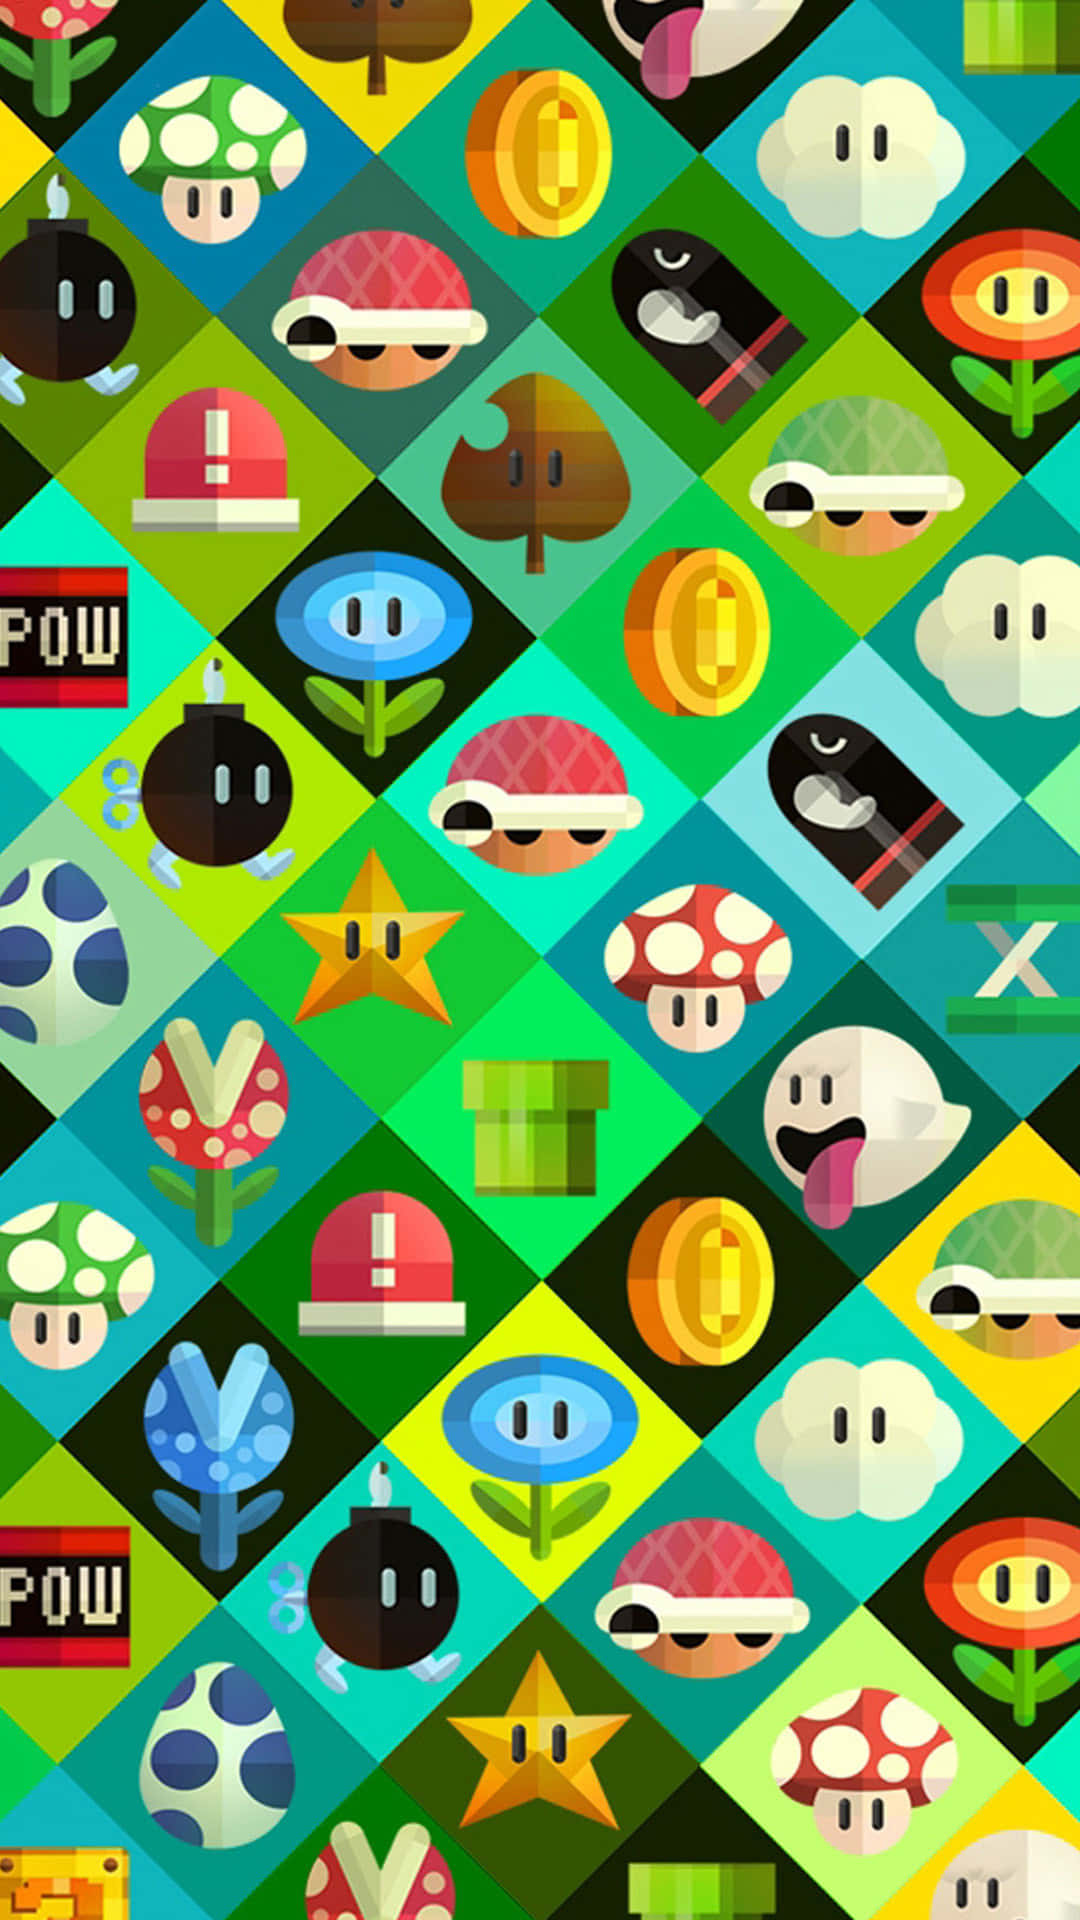 Stay tuned to the new gaming experience with the Nintendo iPhone Wallpaper